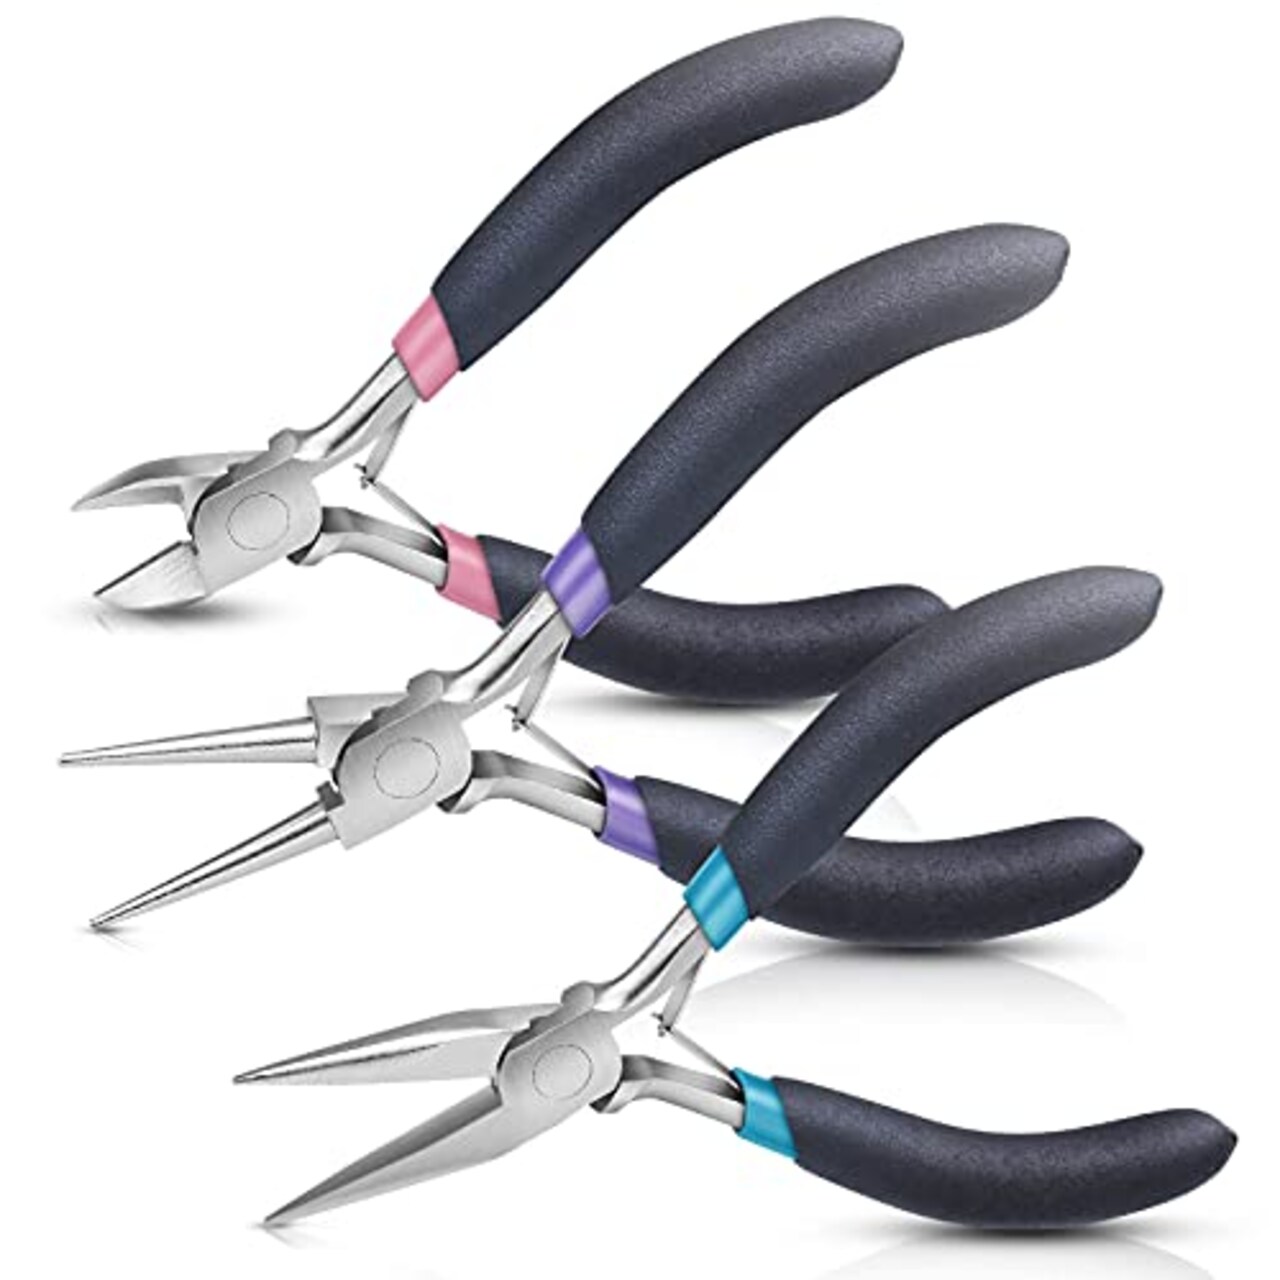 Jewelry Pliers Set, Paxcoo 3Pcs Jewelry Making Tools Kit includes